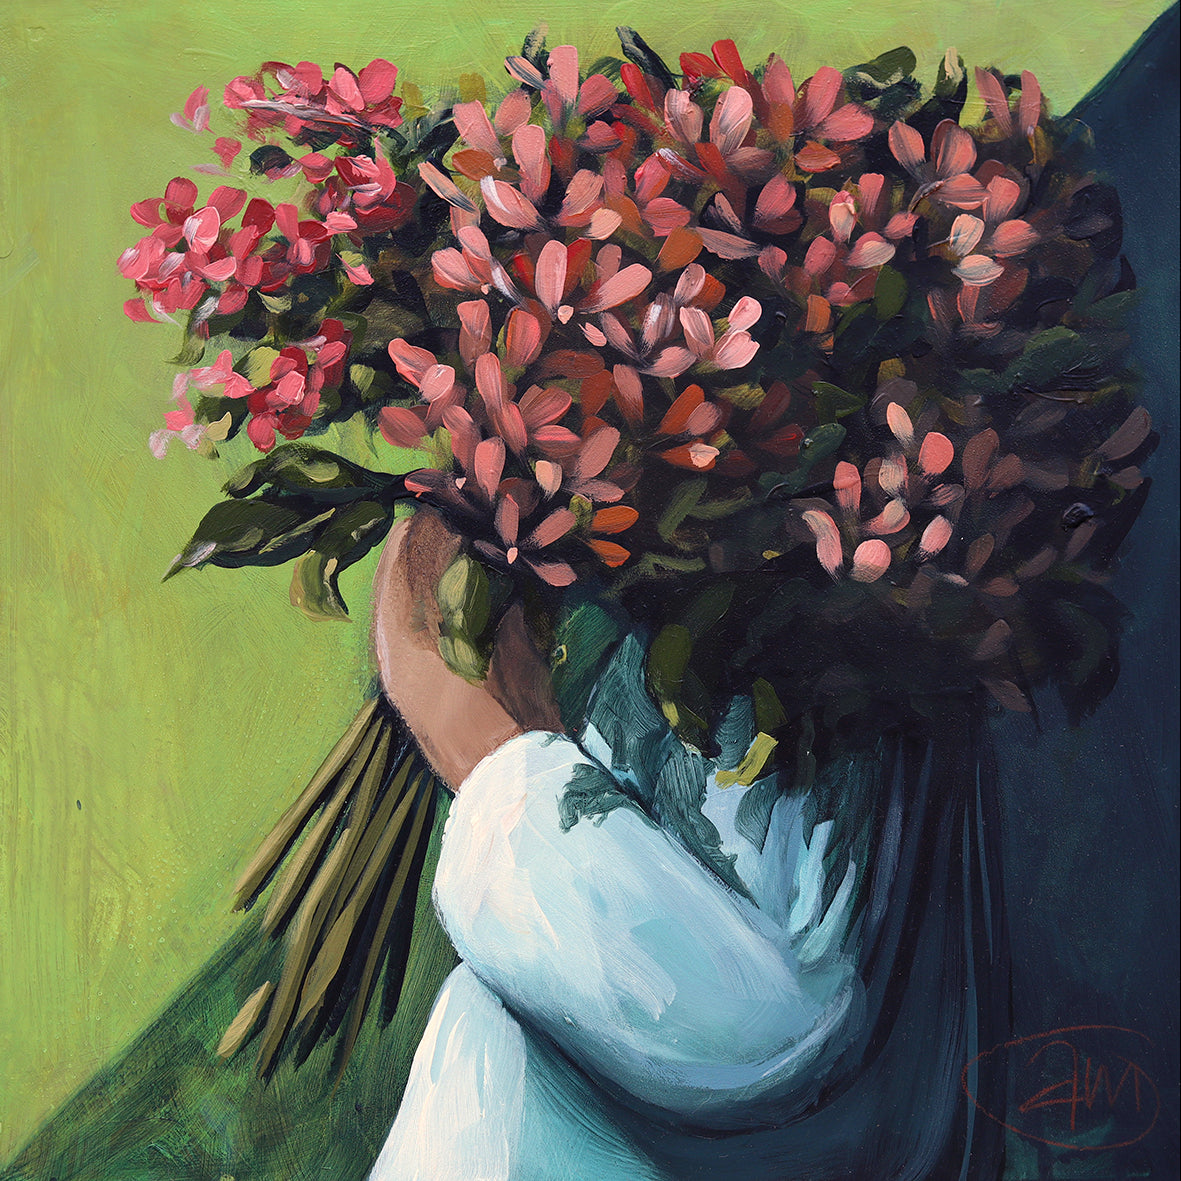 Painting of a woman holding a bunch of pink hydrangeas